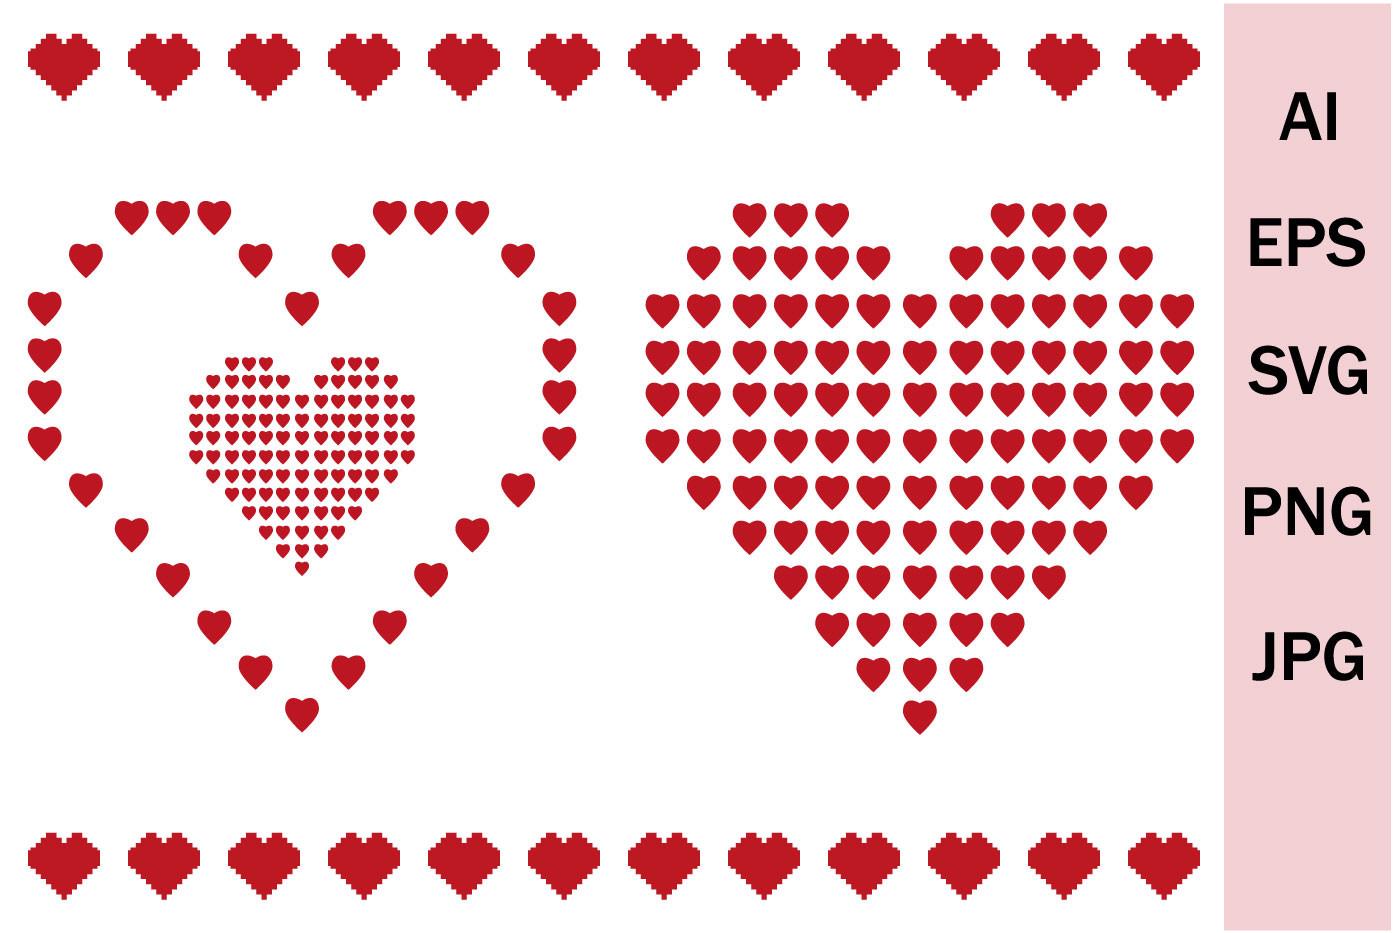 Bundle of SVG Heart Silhouettes.